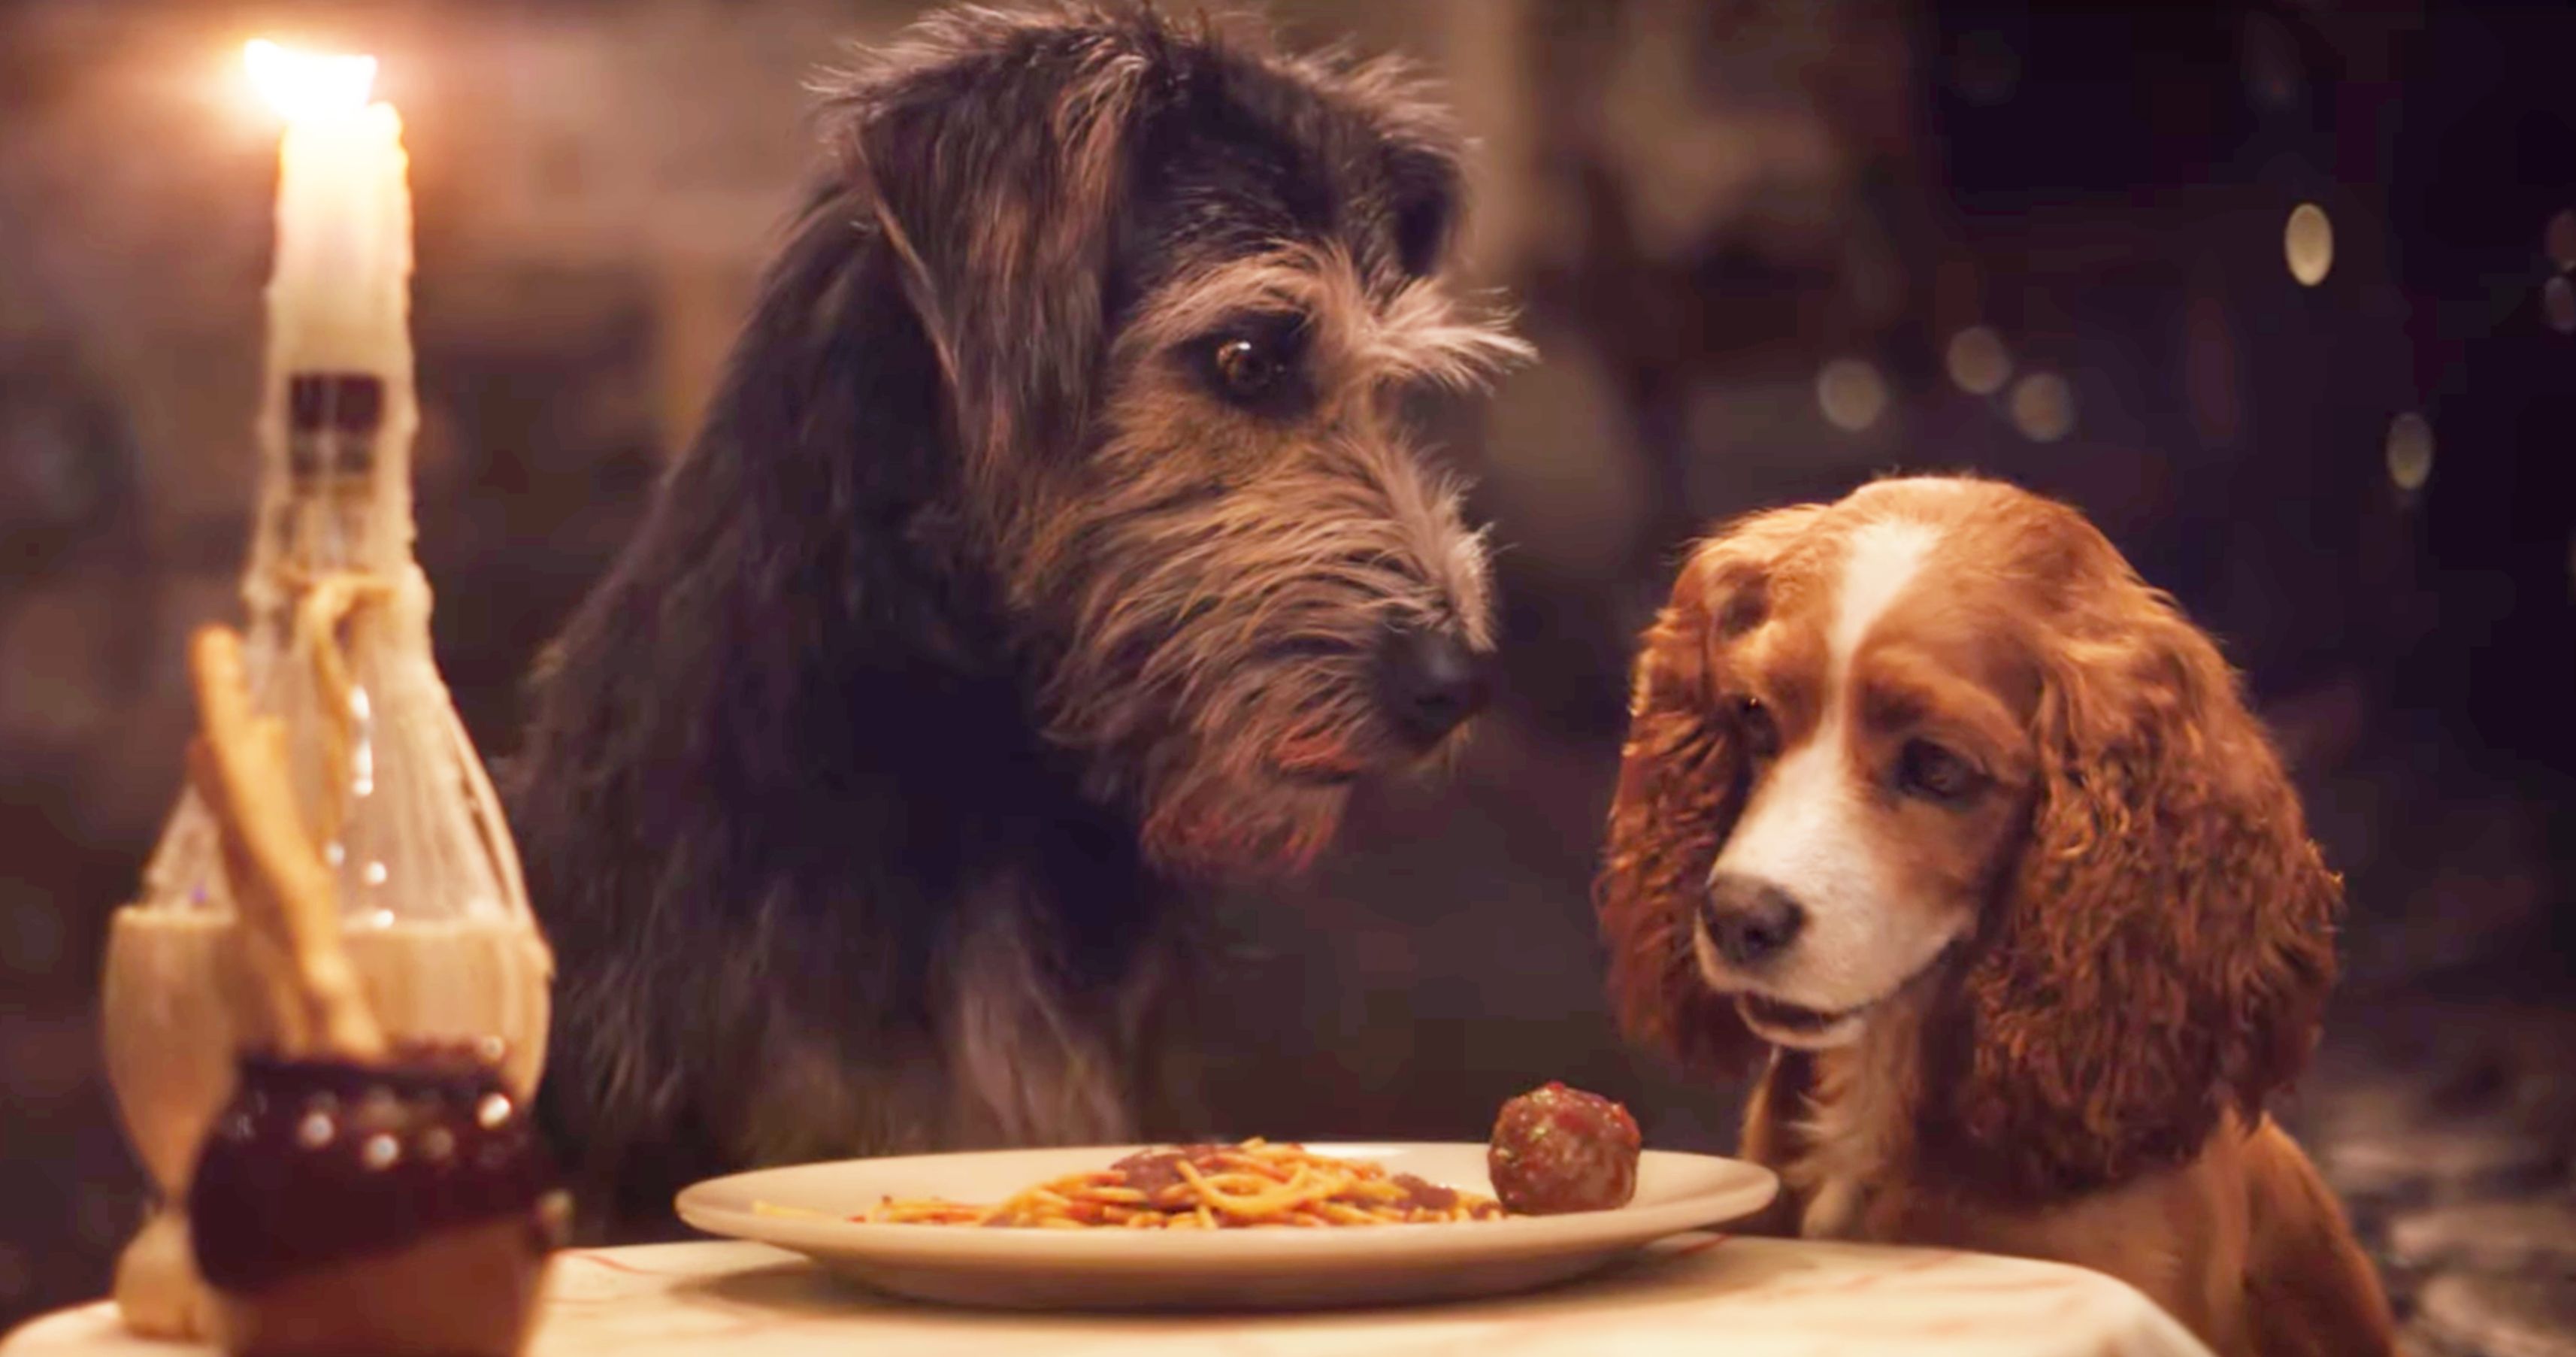 Disney+'s Live-Action Lady and the Tramp Trailer #2 Arrives